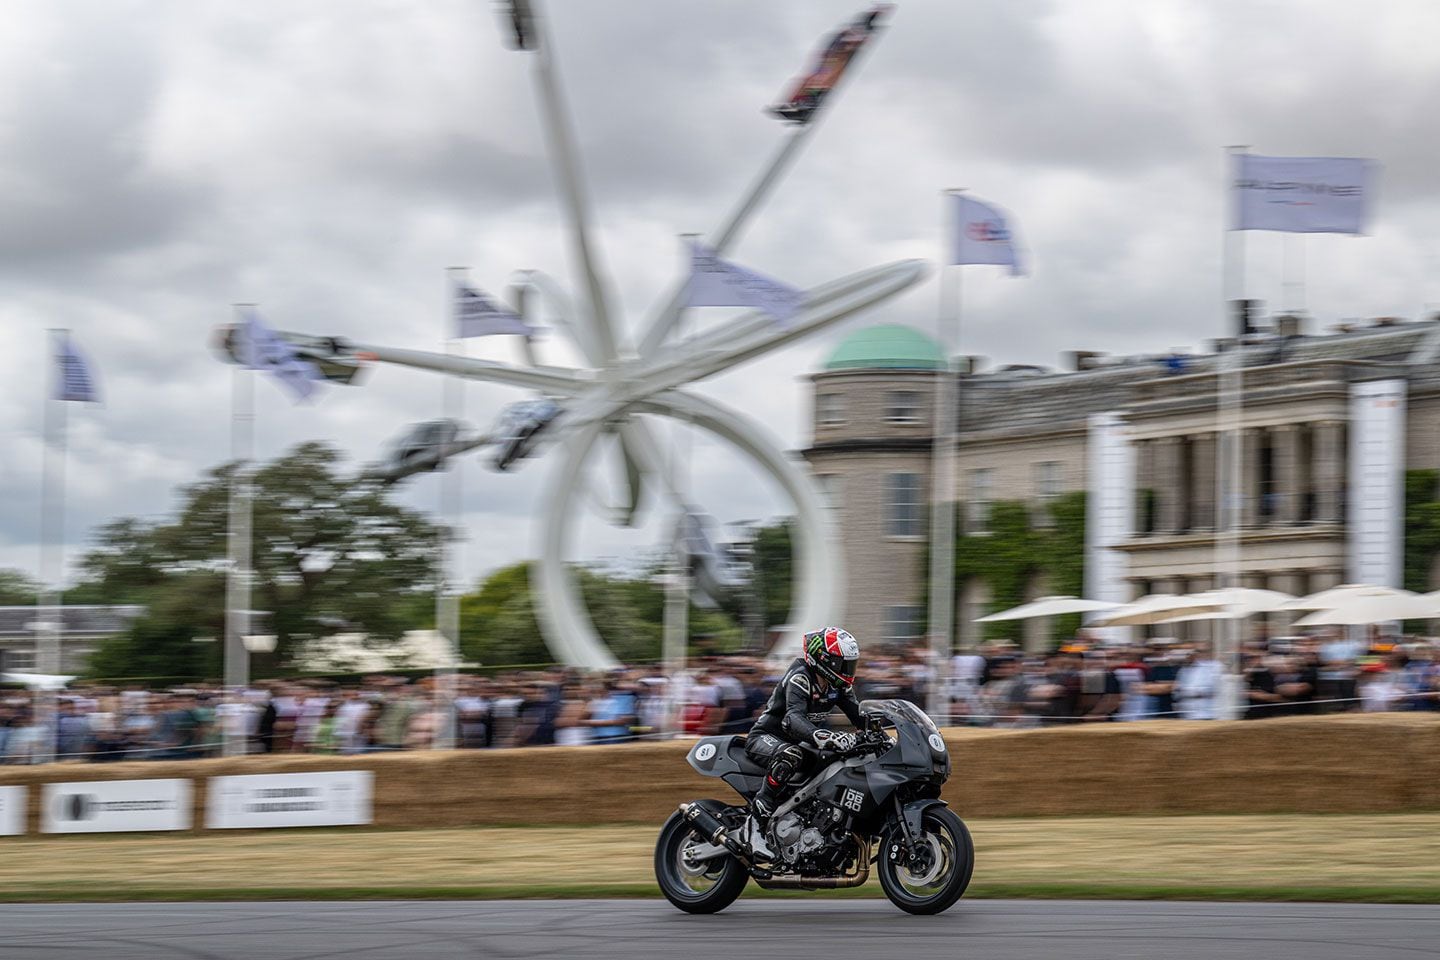 Niall Mackenzie heading up the hill at Goodwood.